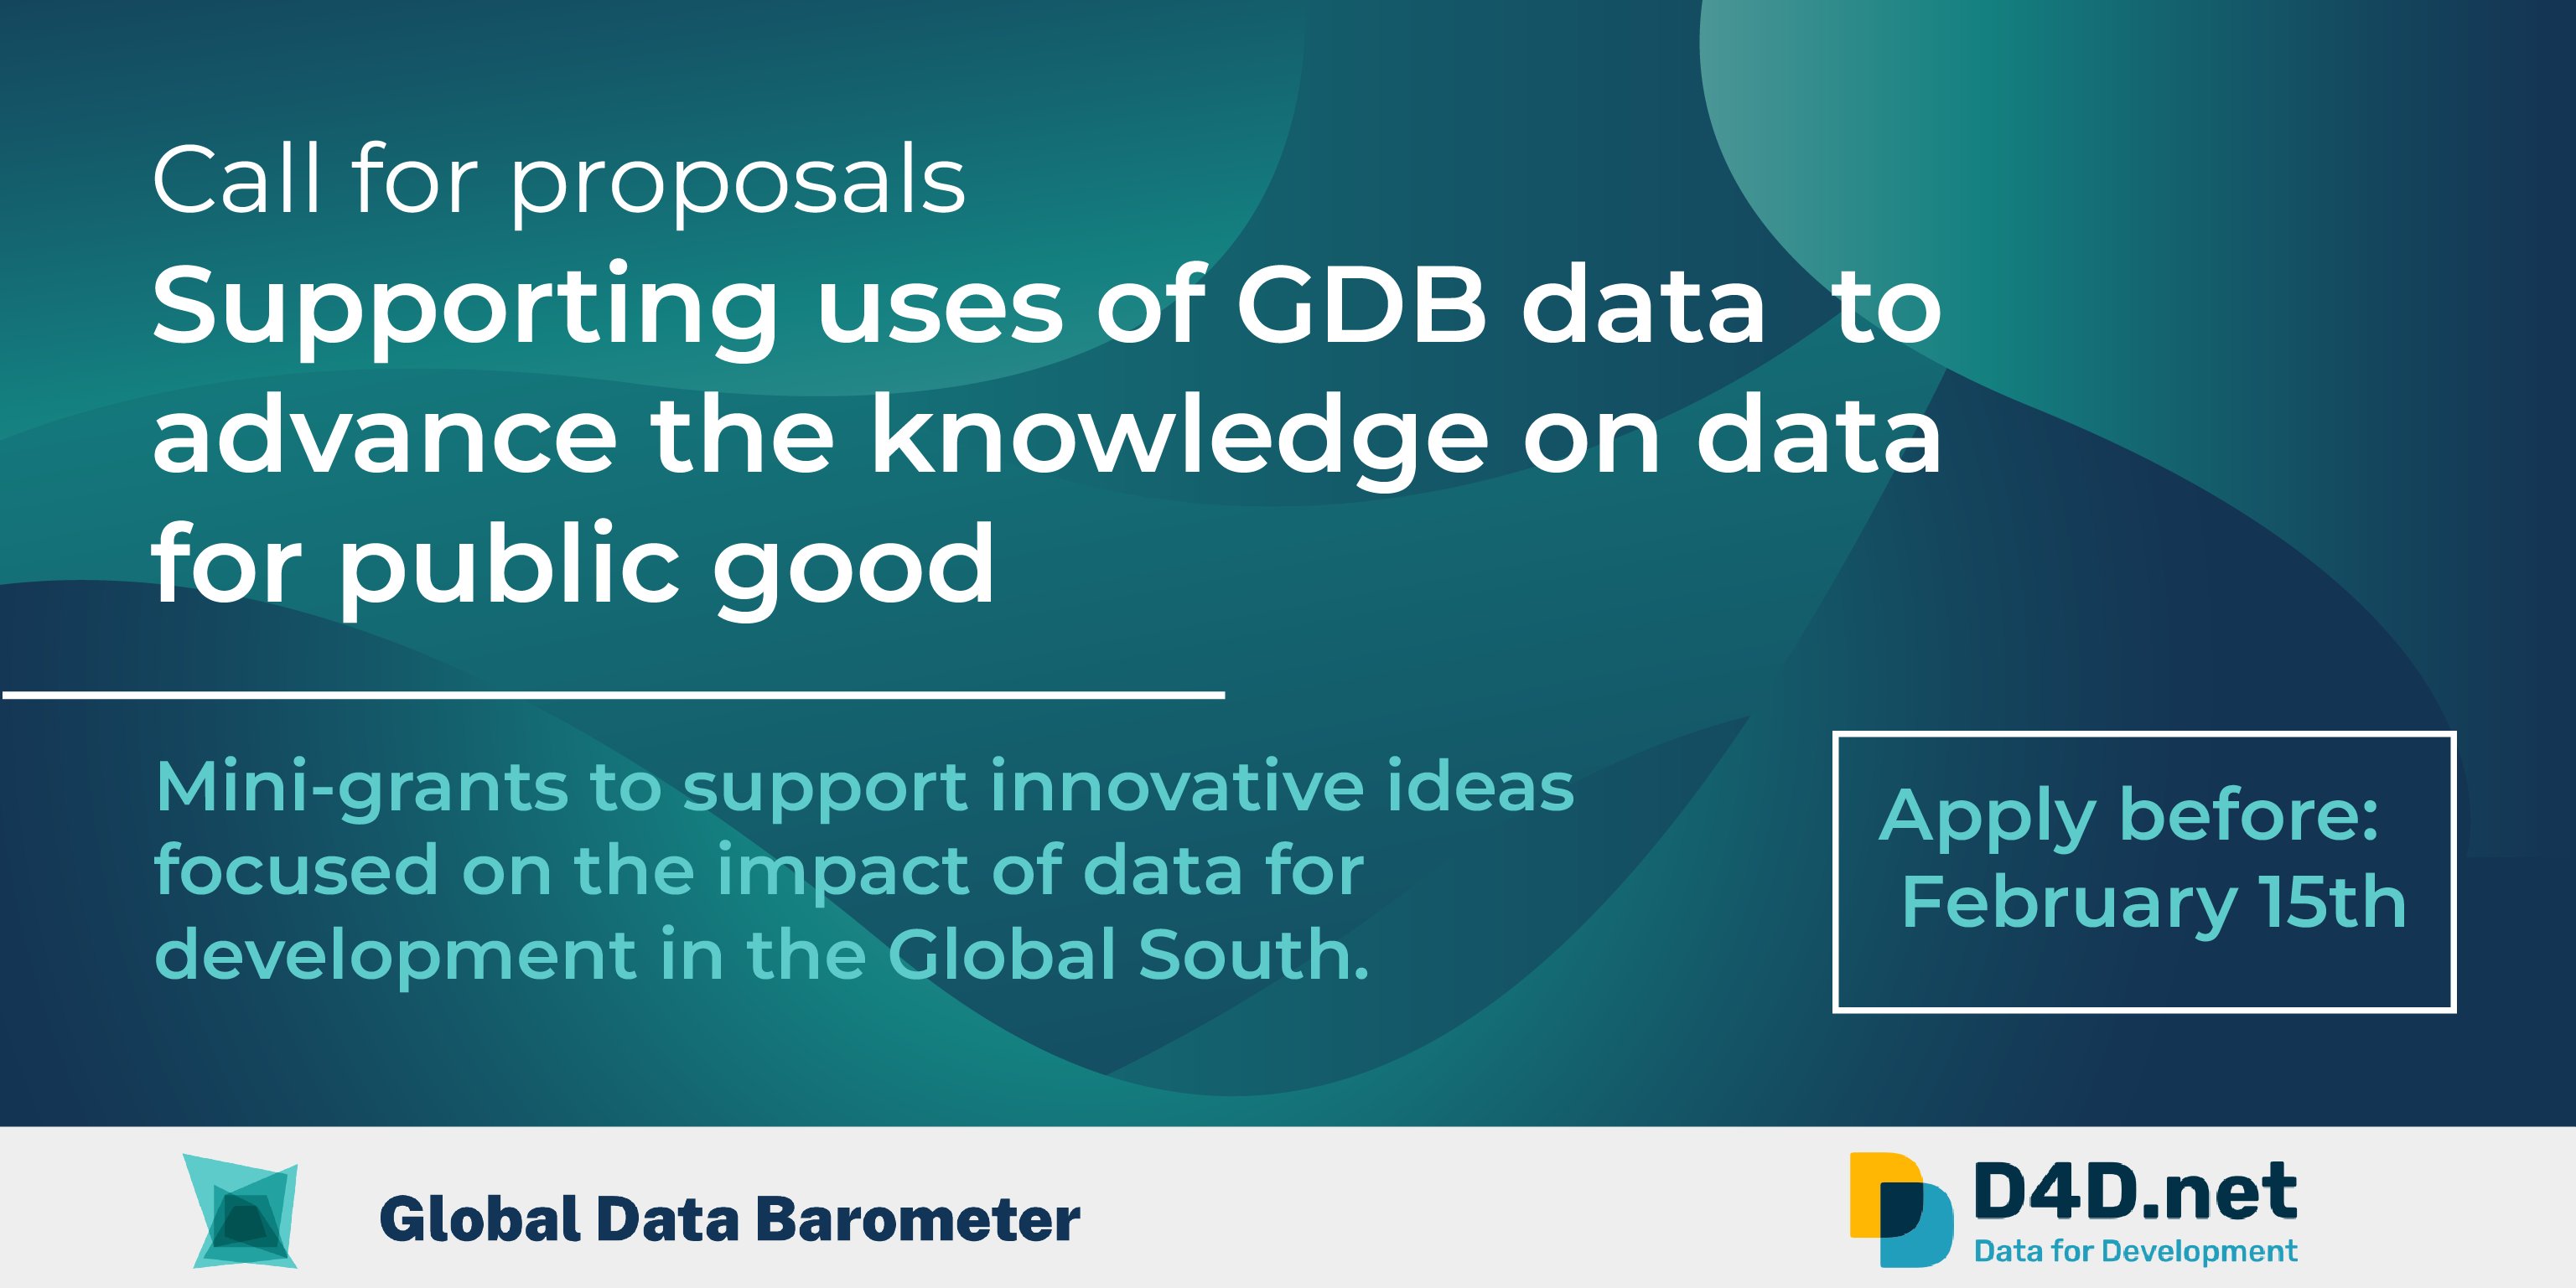 Call for Proposals: Using Data for a Public Good